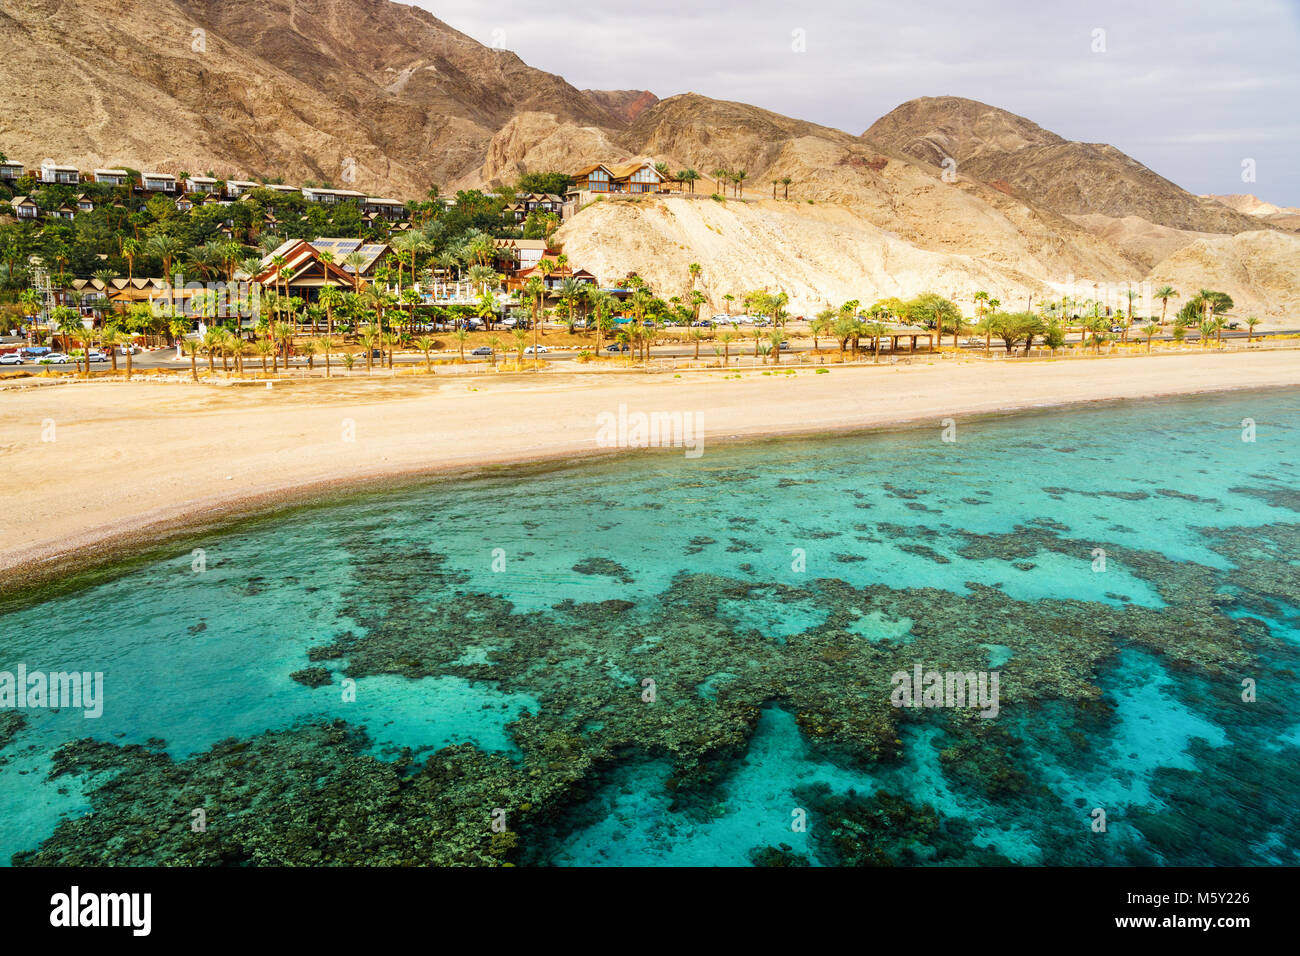 Coral reef of Aqaba Bay in Red Sea, empty beach and desert near Eilat, Israel. Contrast between turqoise coral sea and dry desert. Travel theme. Stock Photo